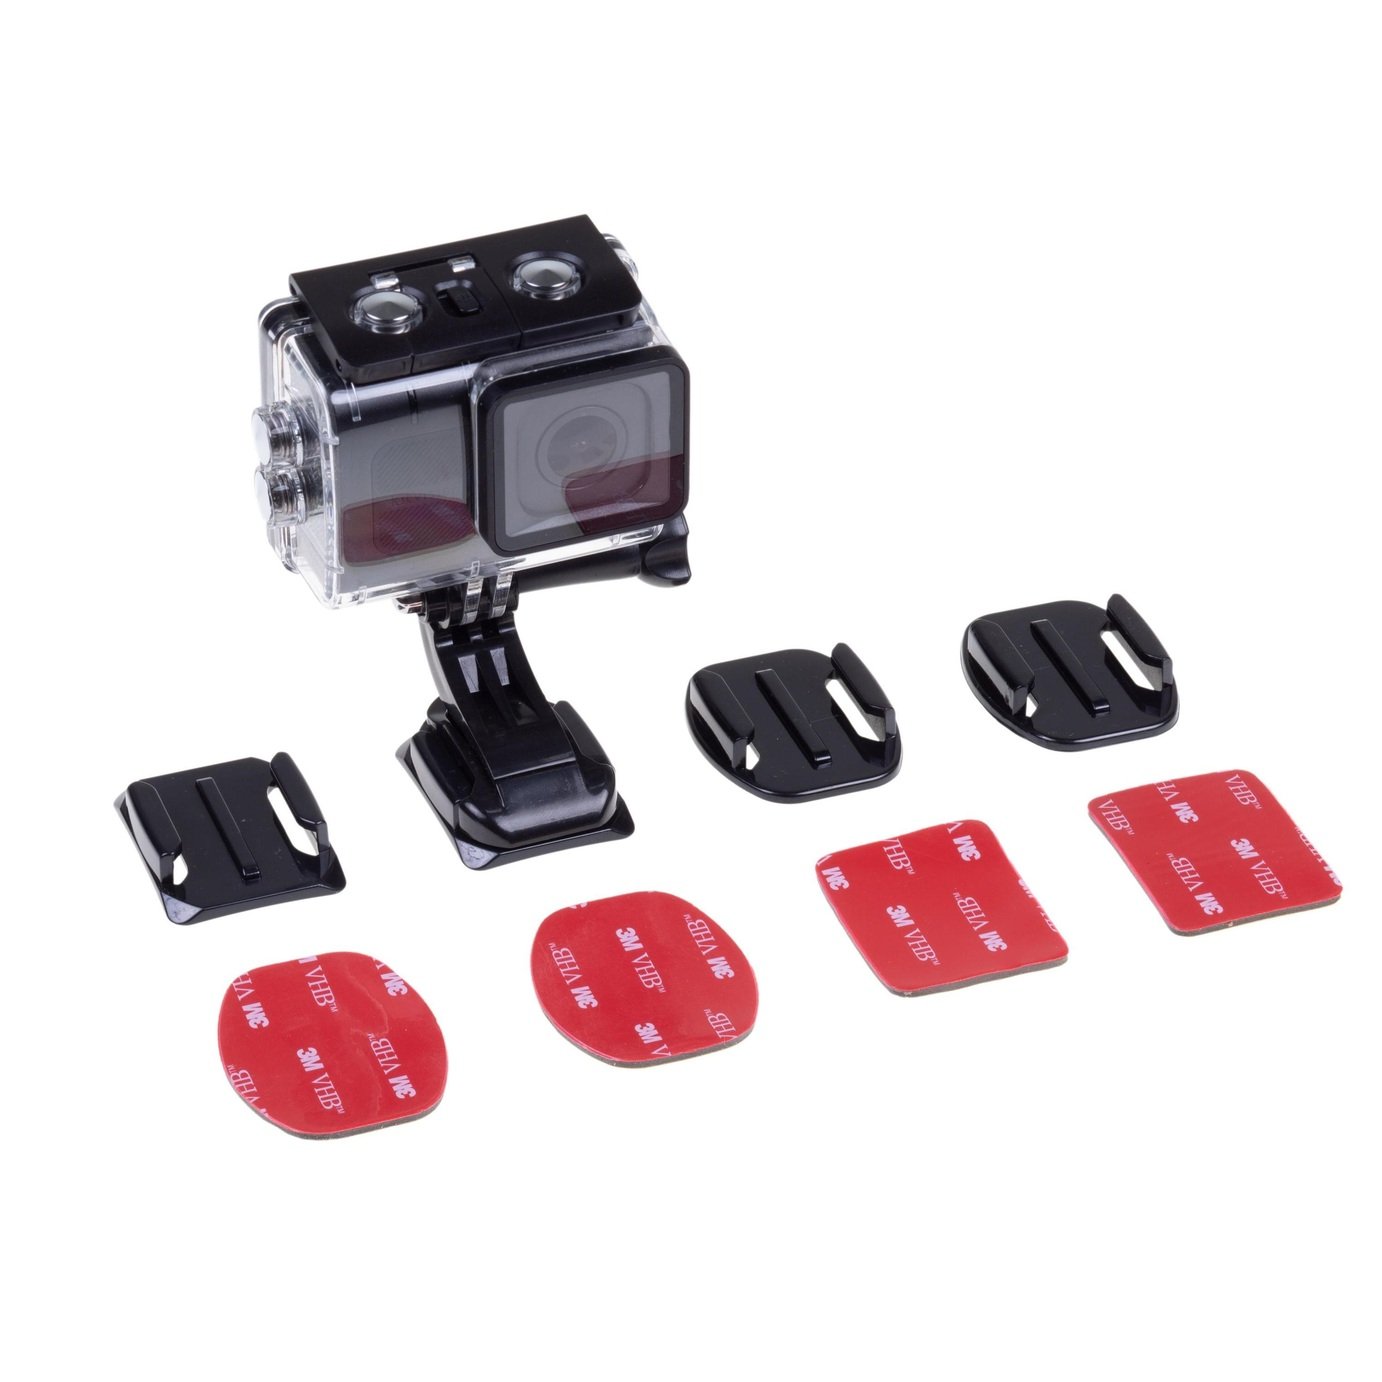 Kitvision Adhesive Mount for Action Cameras Review